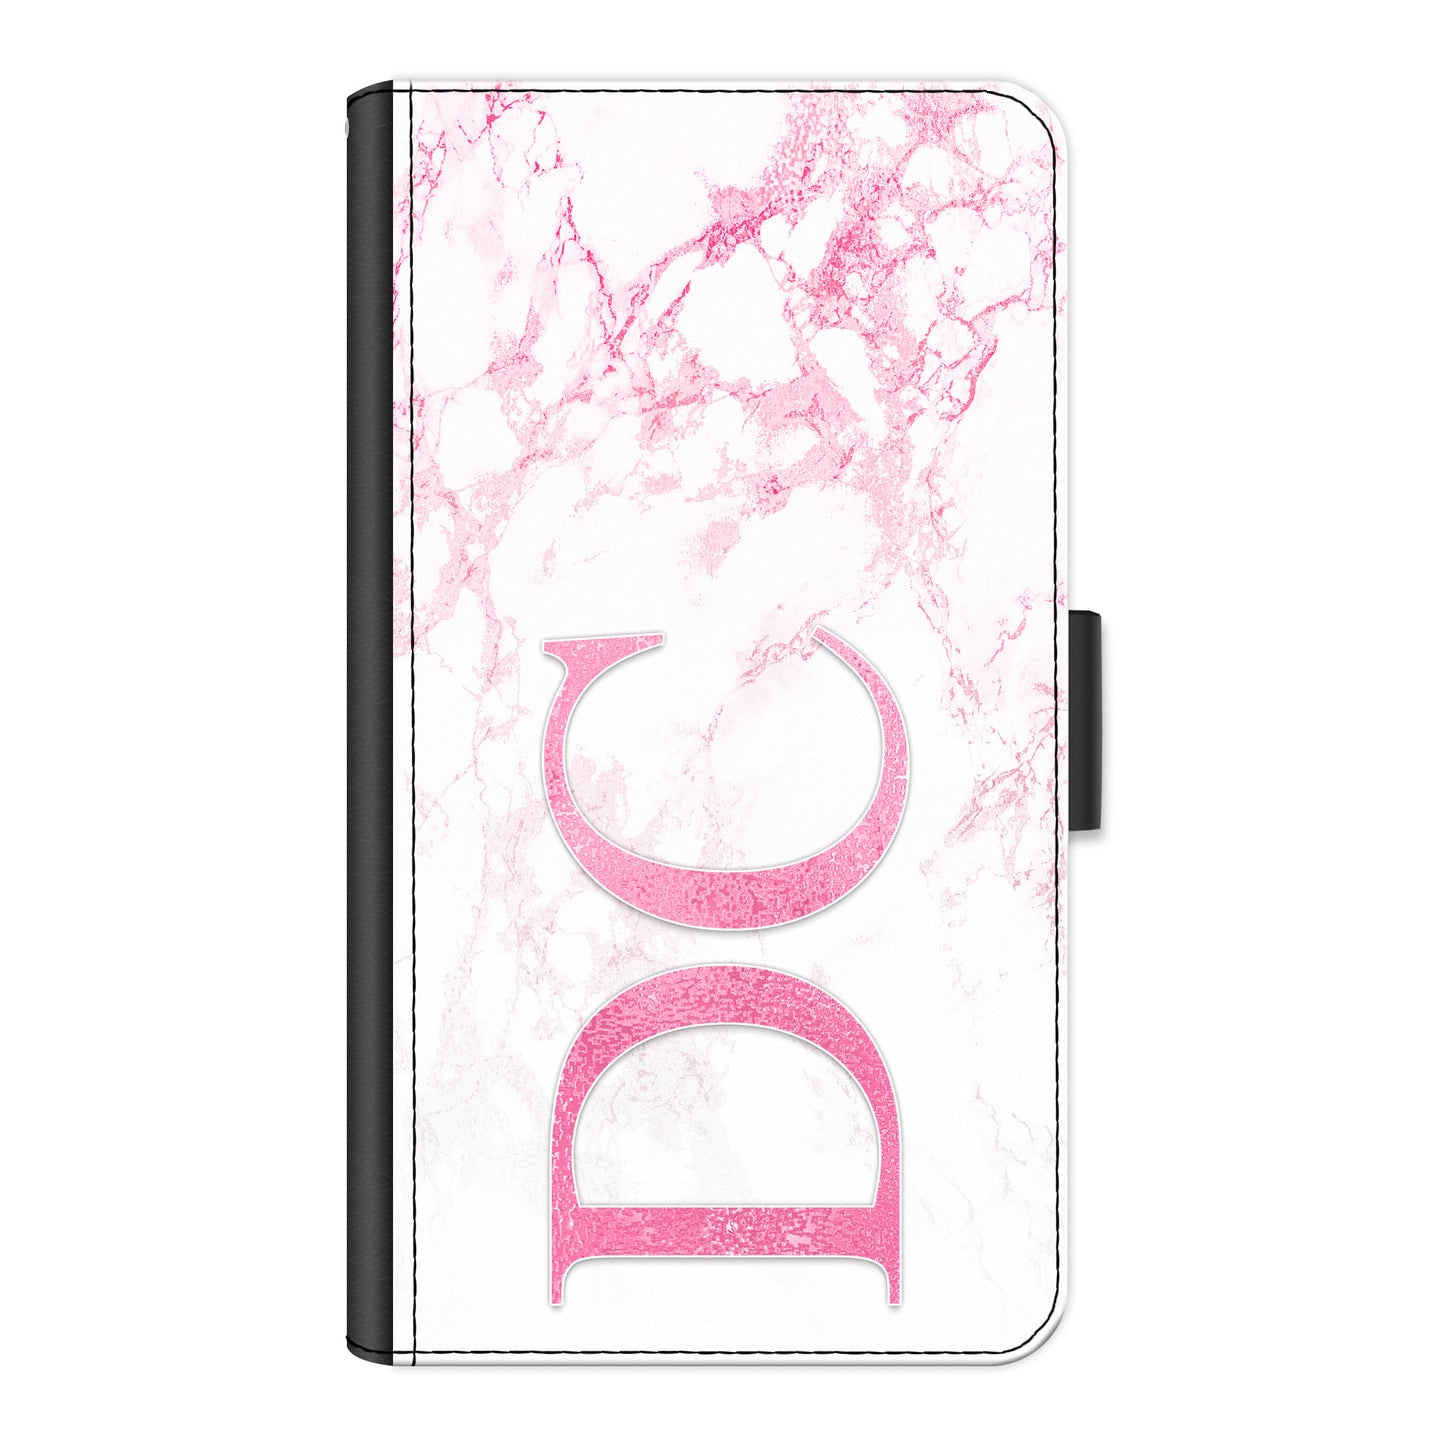 Personalised Nokia Phone Leather Wallet with Pink Initials on Pink Marble